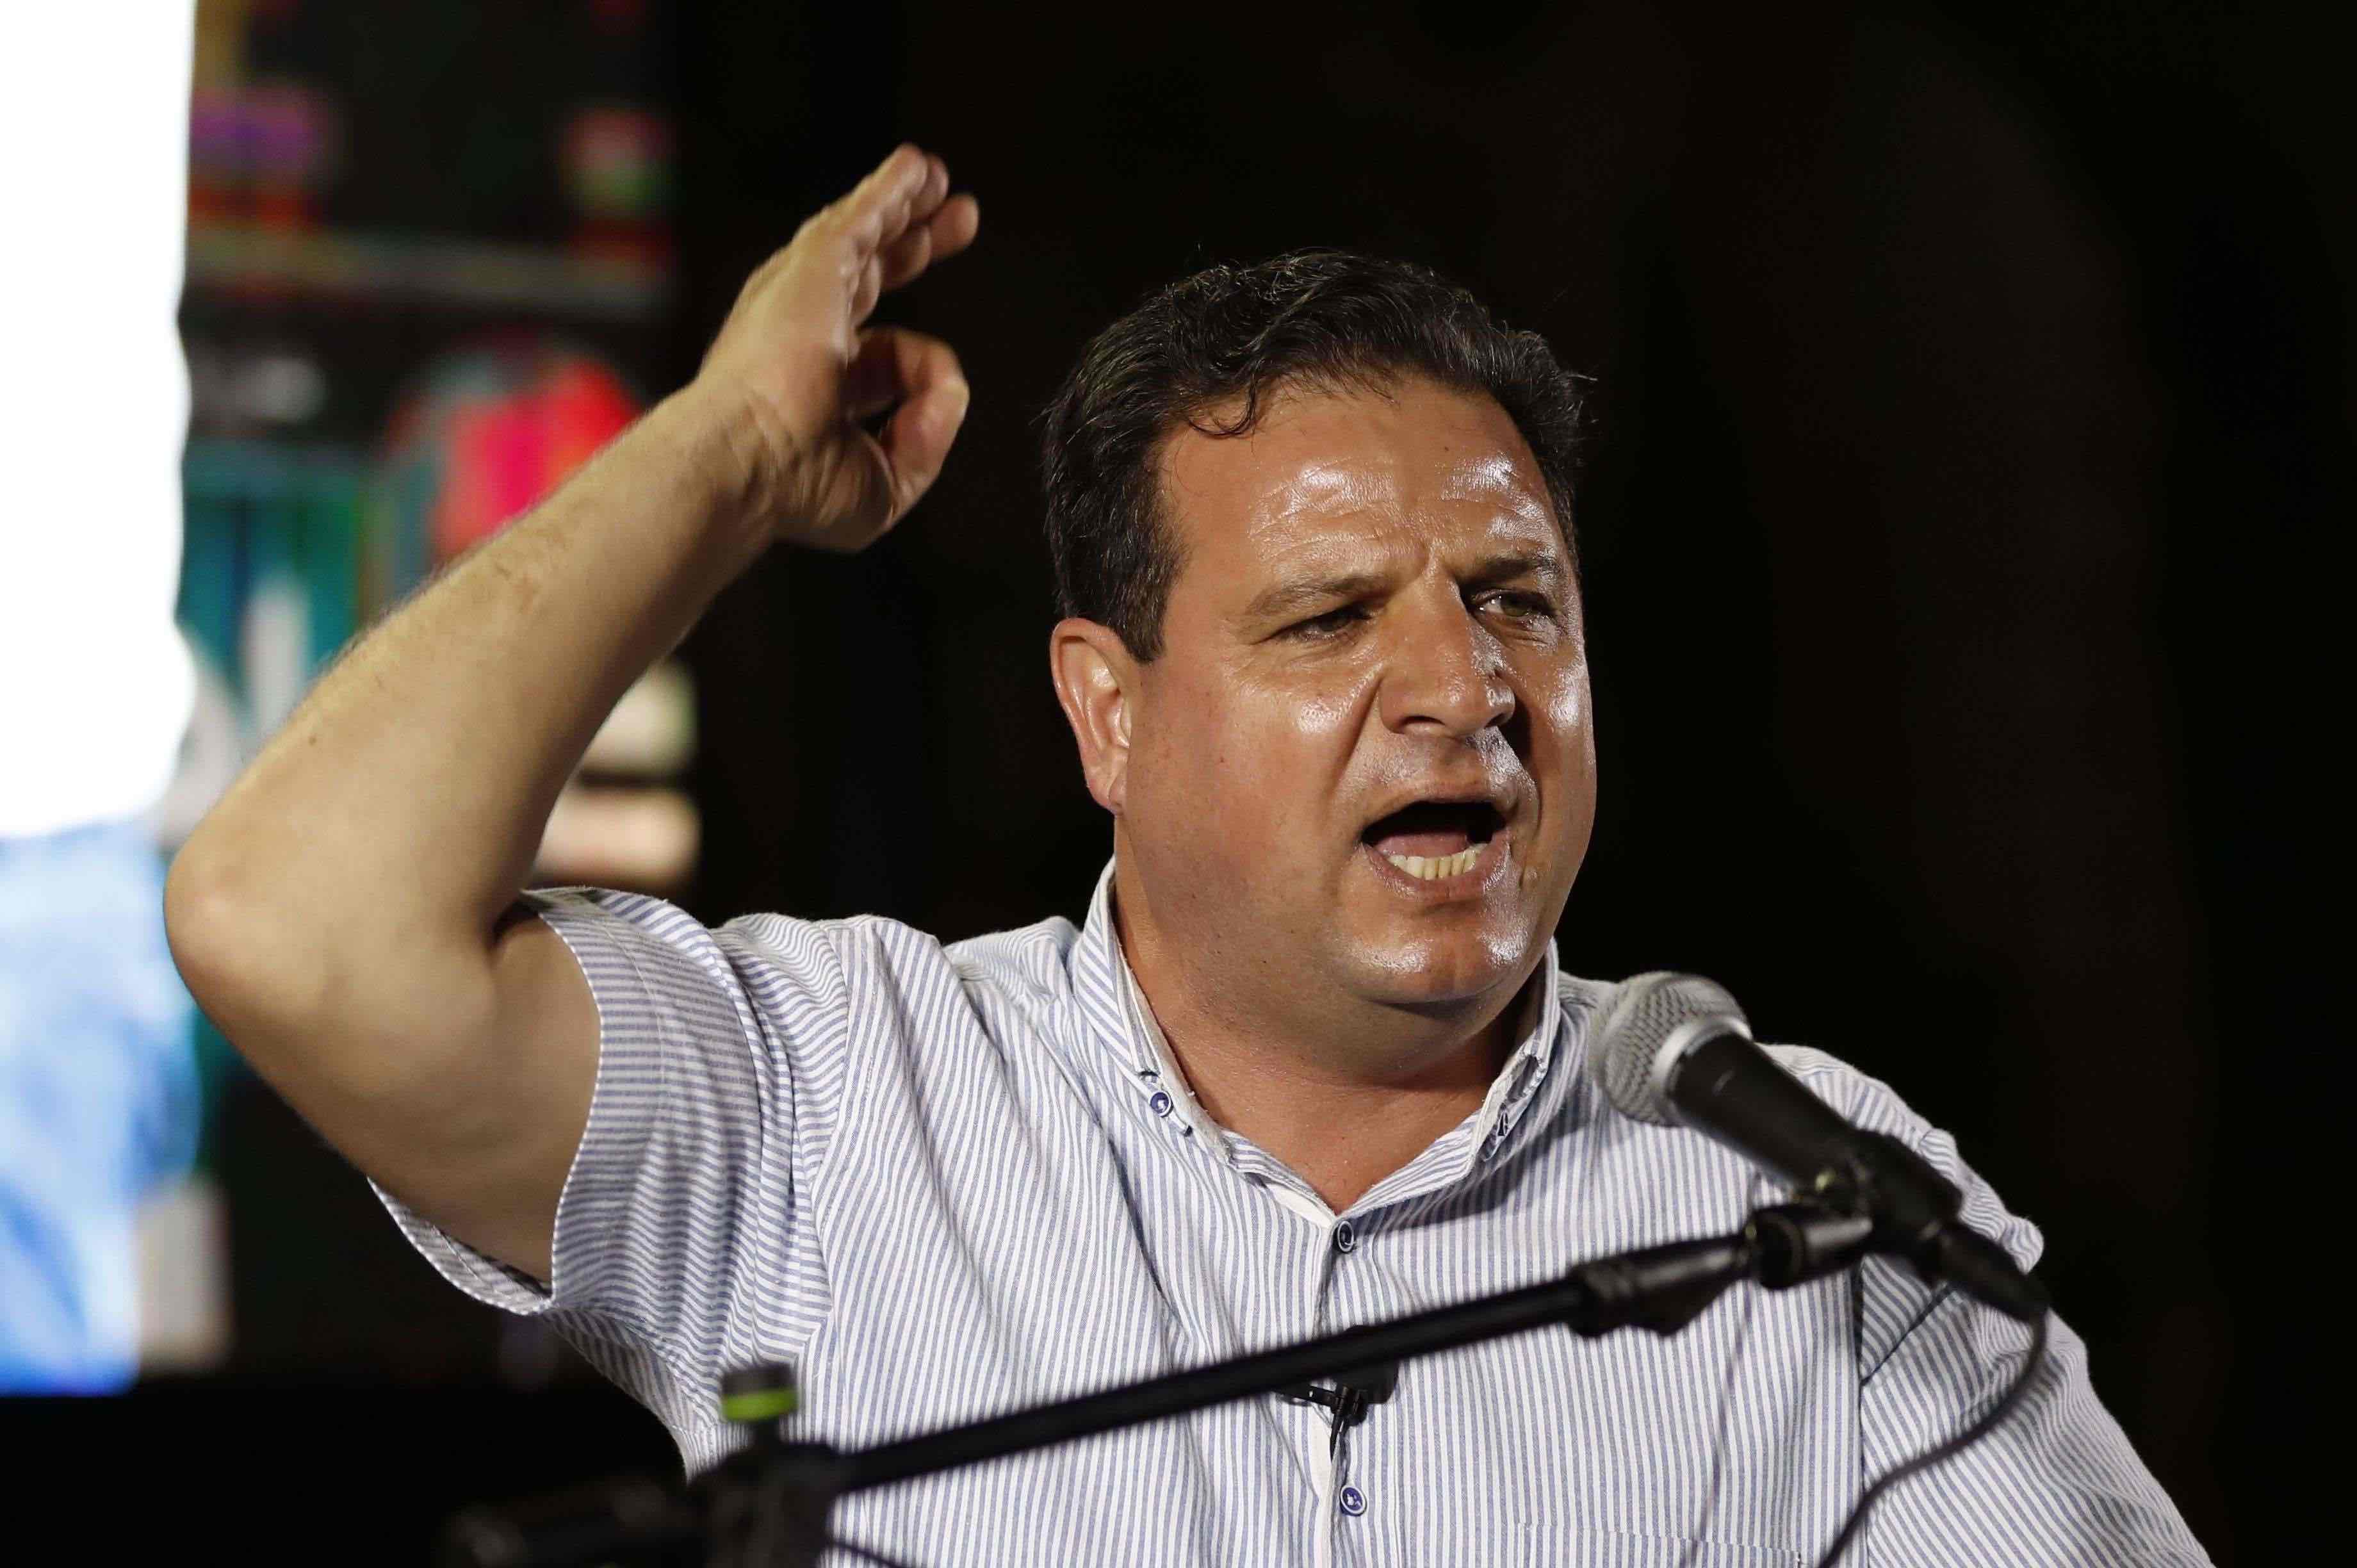 The head of the mainly Arab Joint List alliance Ayman Odeh speaks during an electoral campaign rally